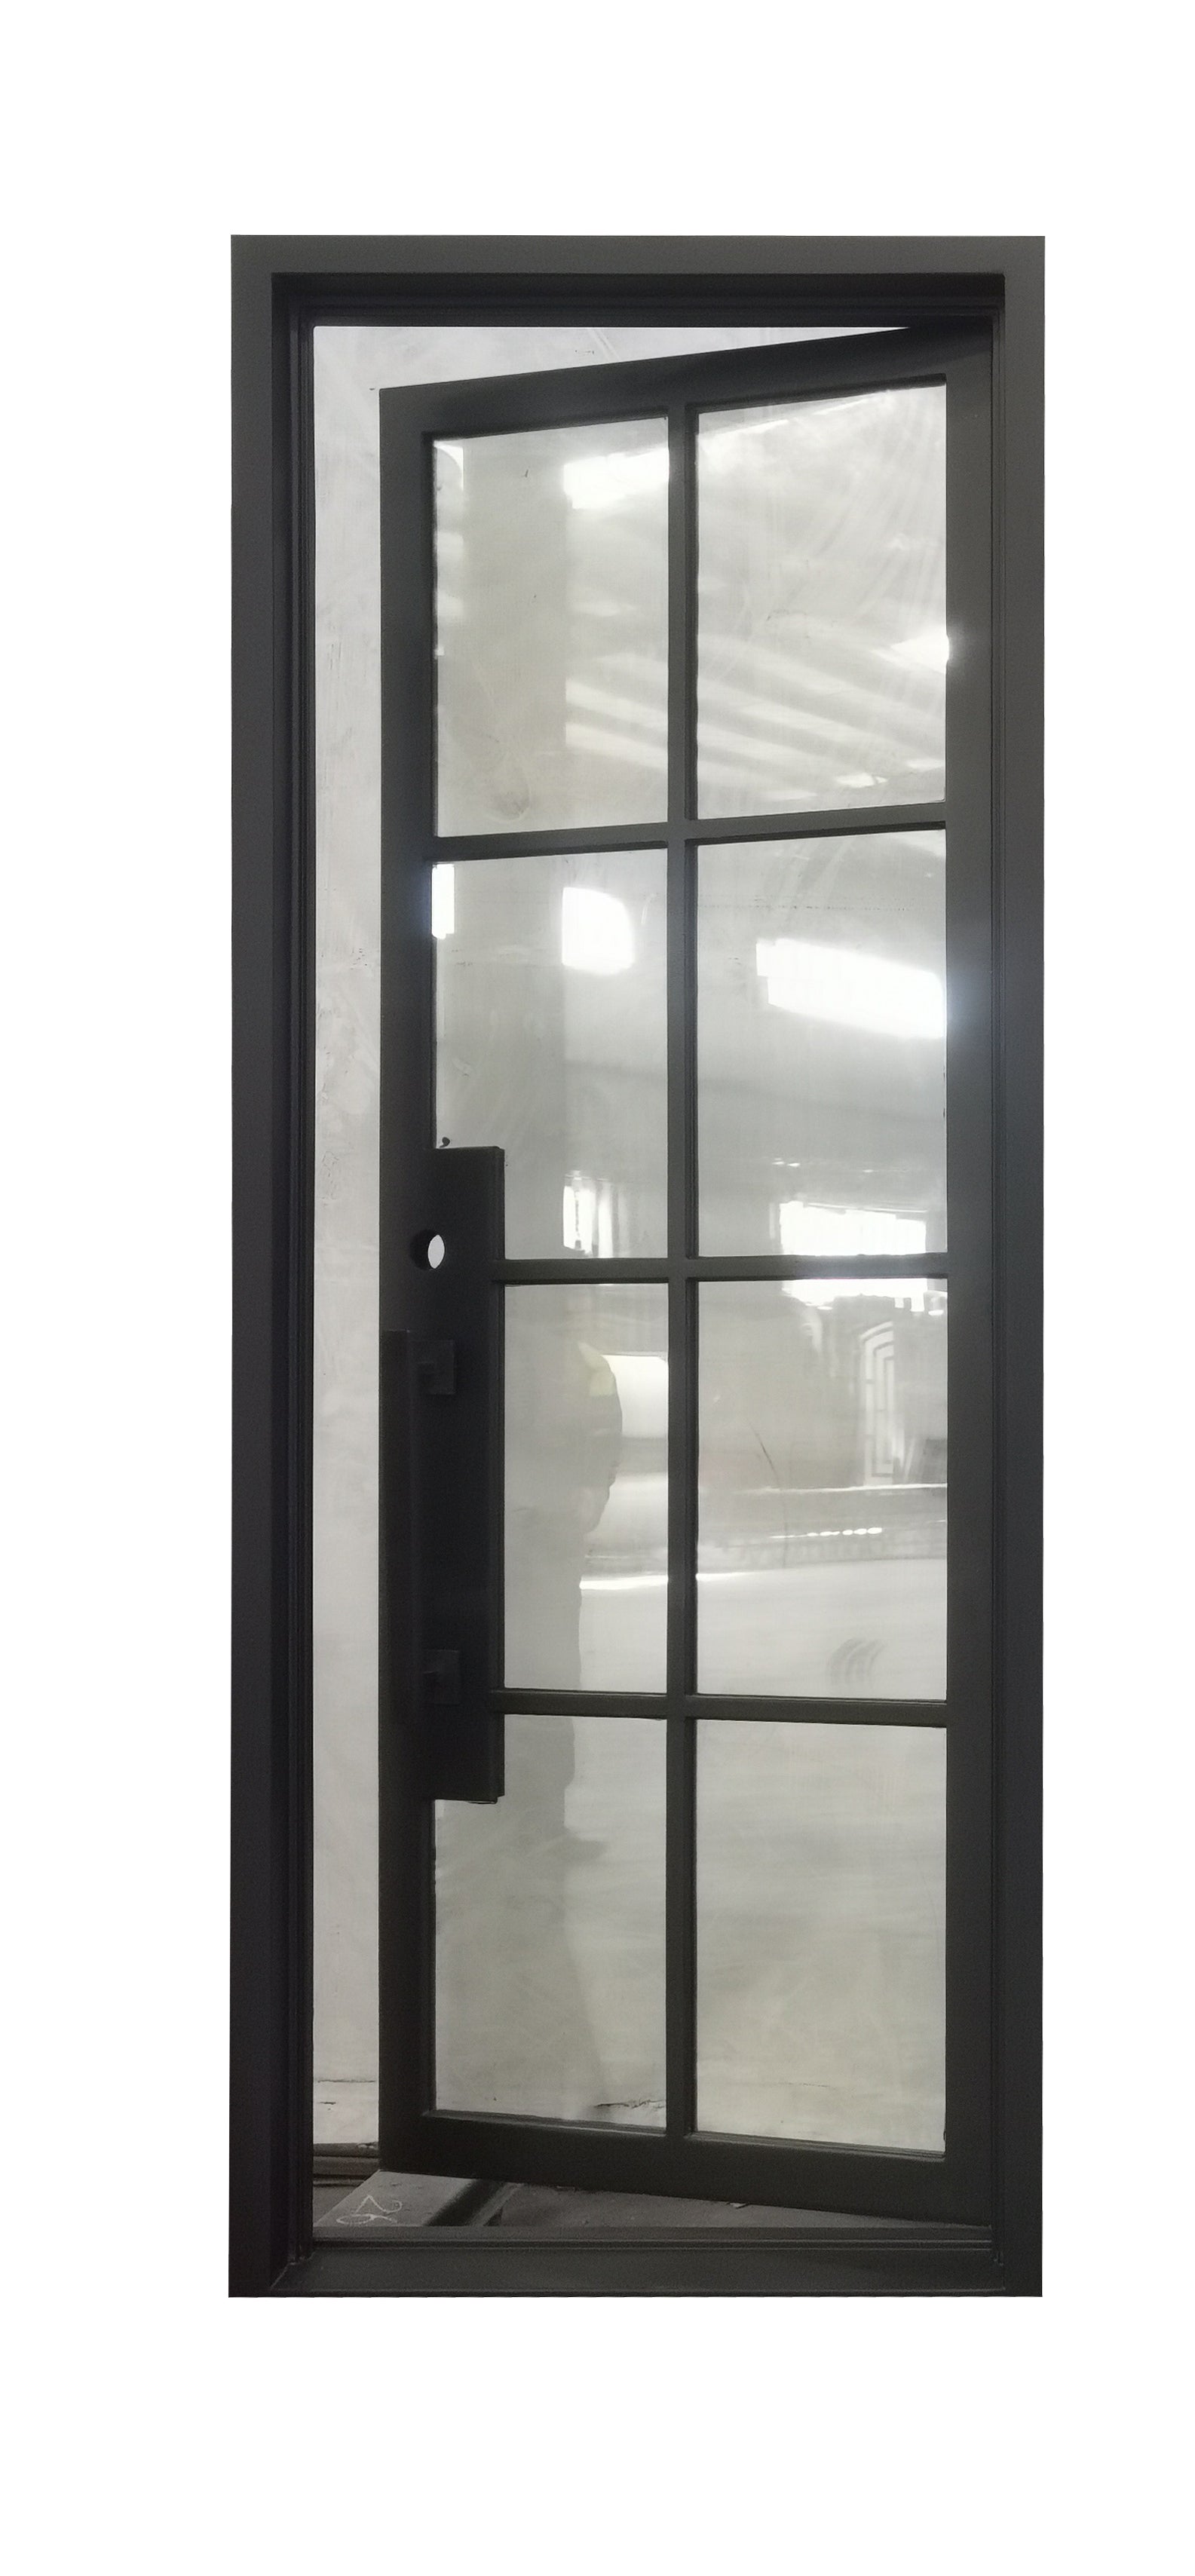 Bruceville Model Pre Hung Single Front Entry Wrought Iron Door With Low E Clear Glass Matte Black Finish